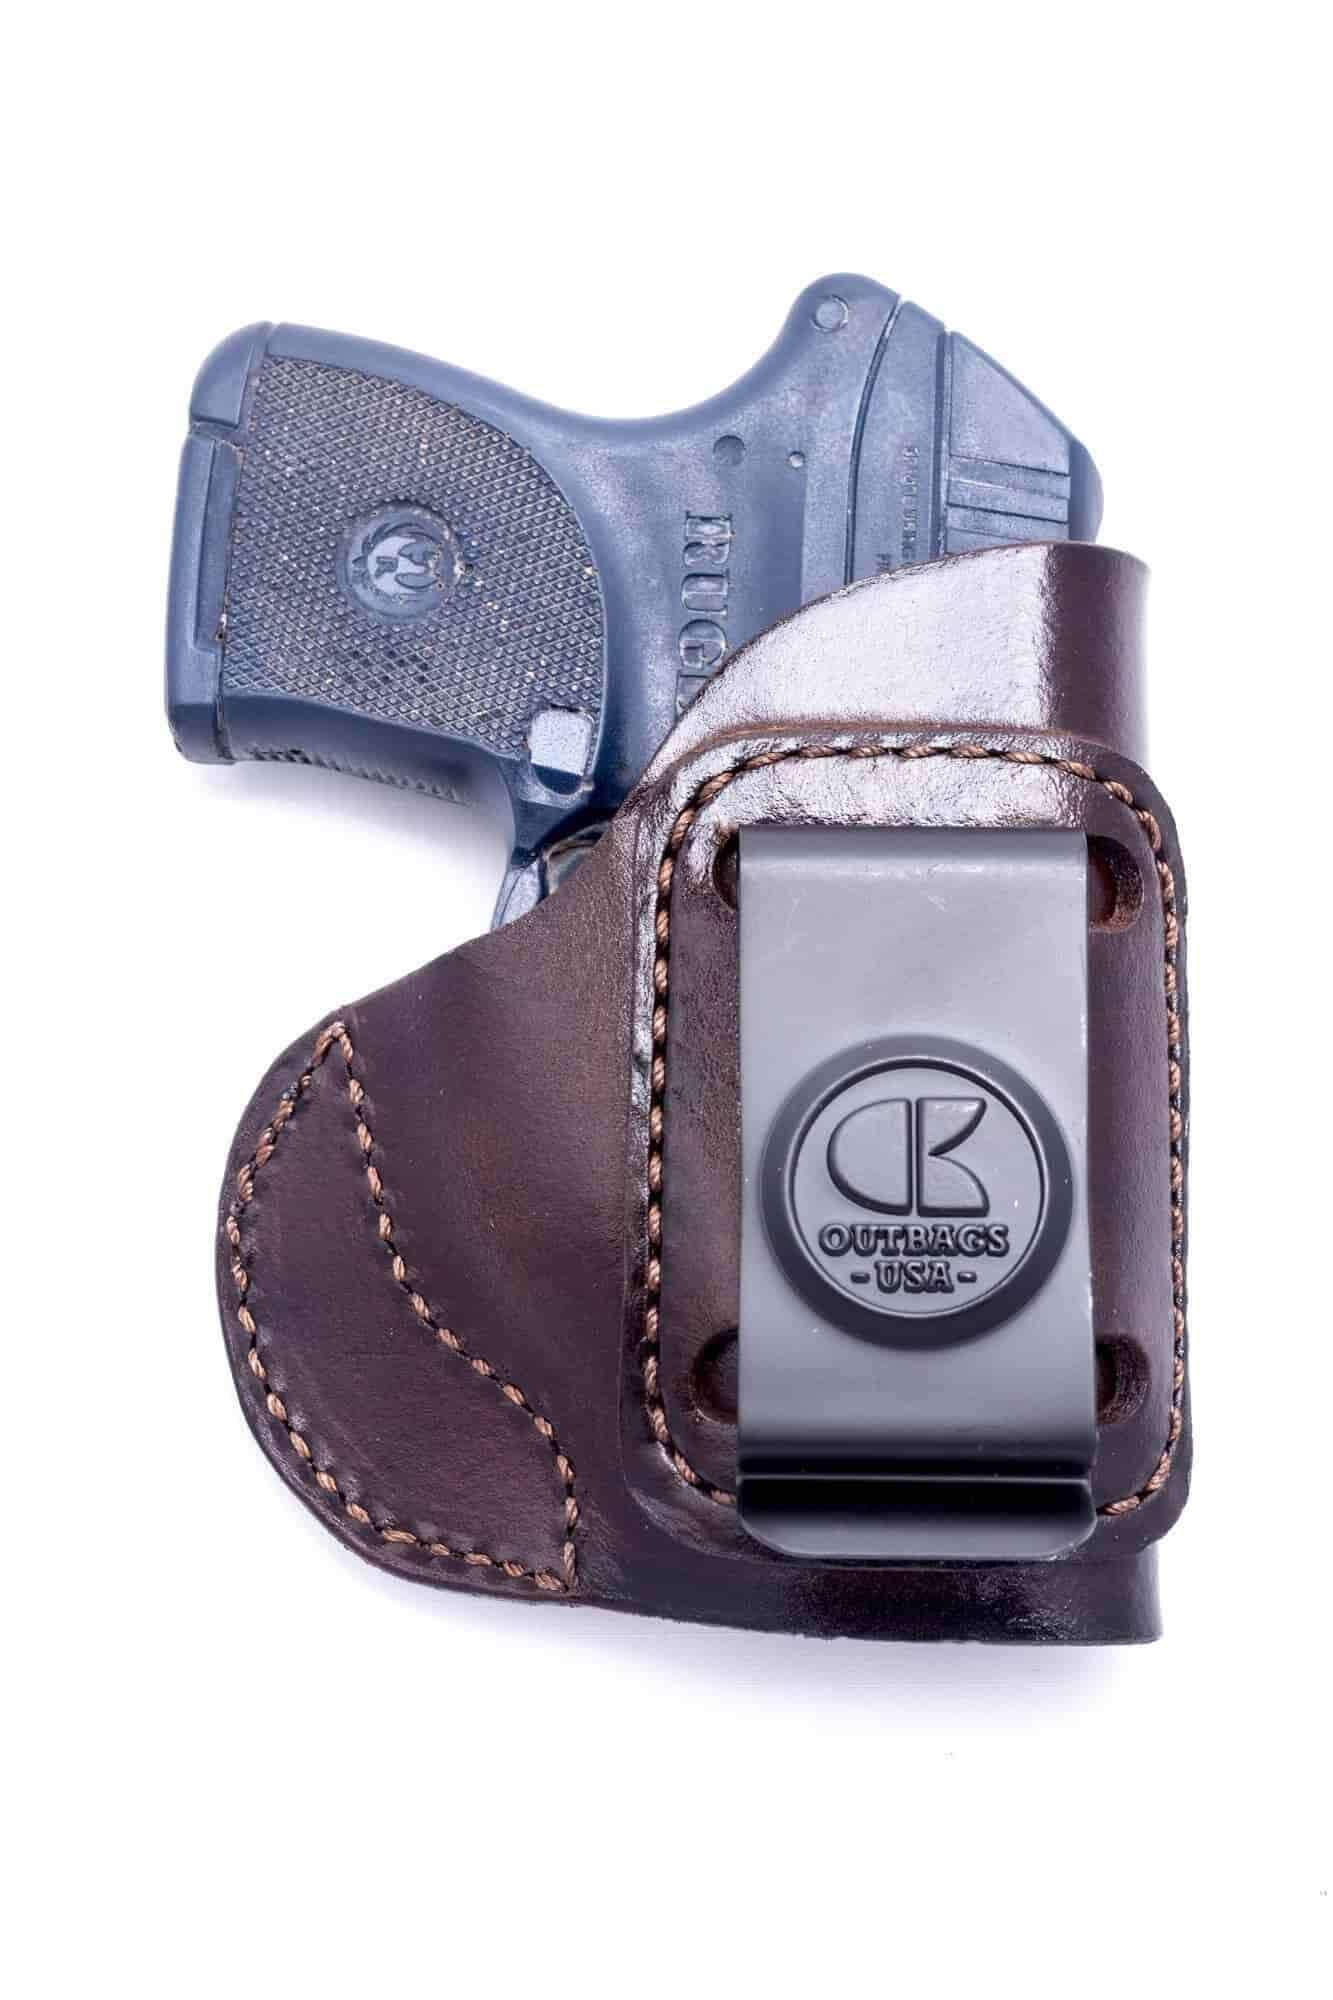 IWB Holster Clip  Find Reliable Tuckable Holster Clips at OUTBAGS USA